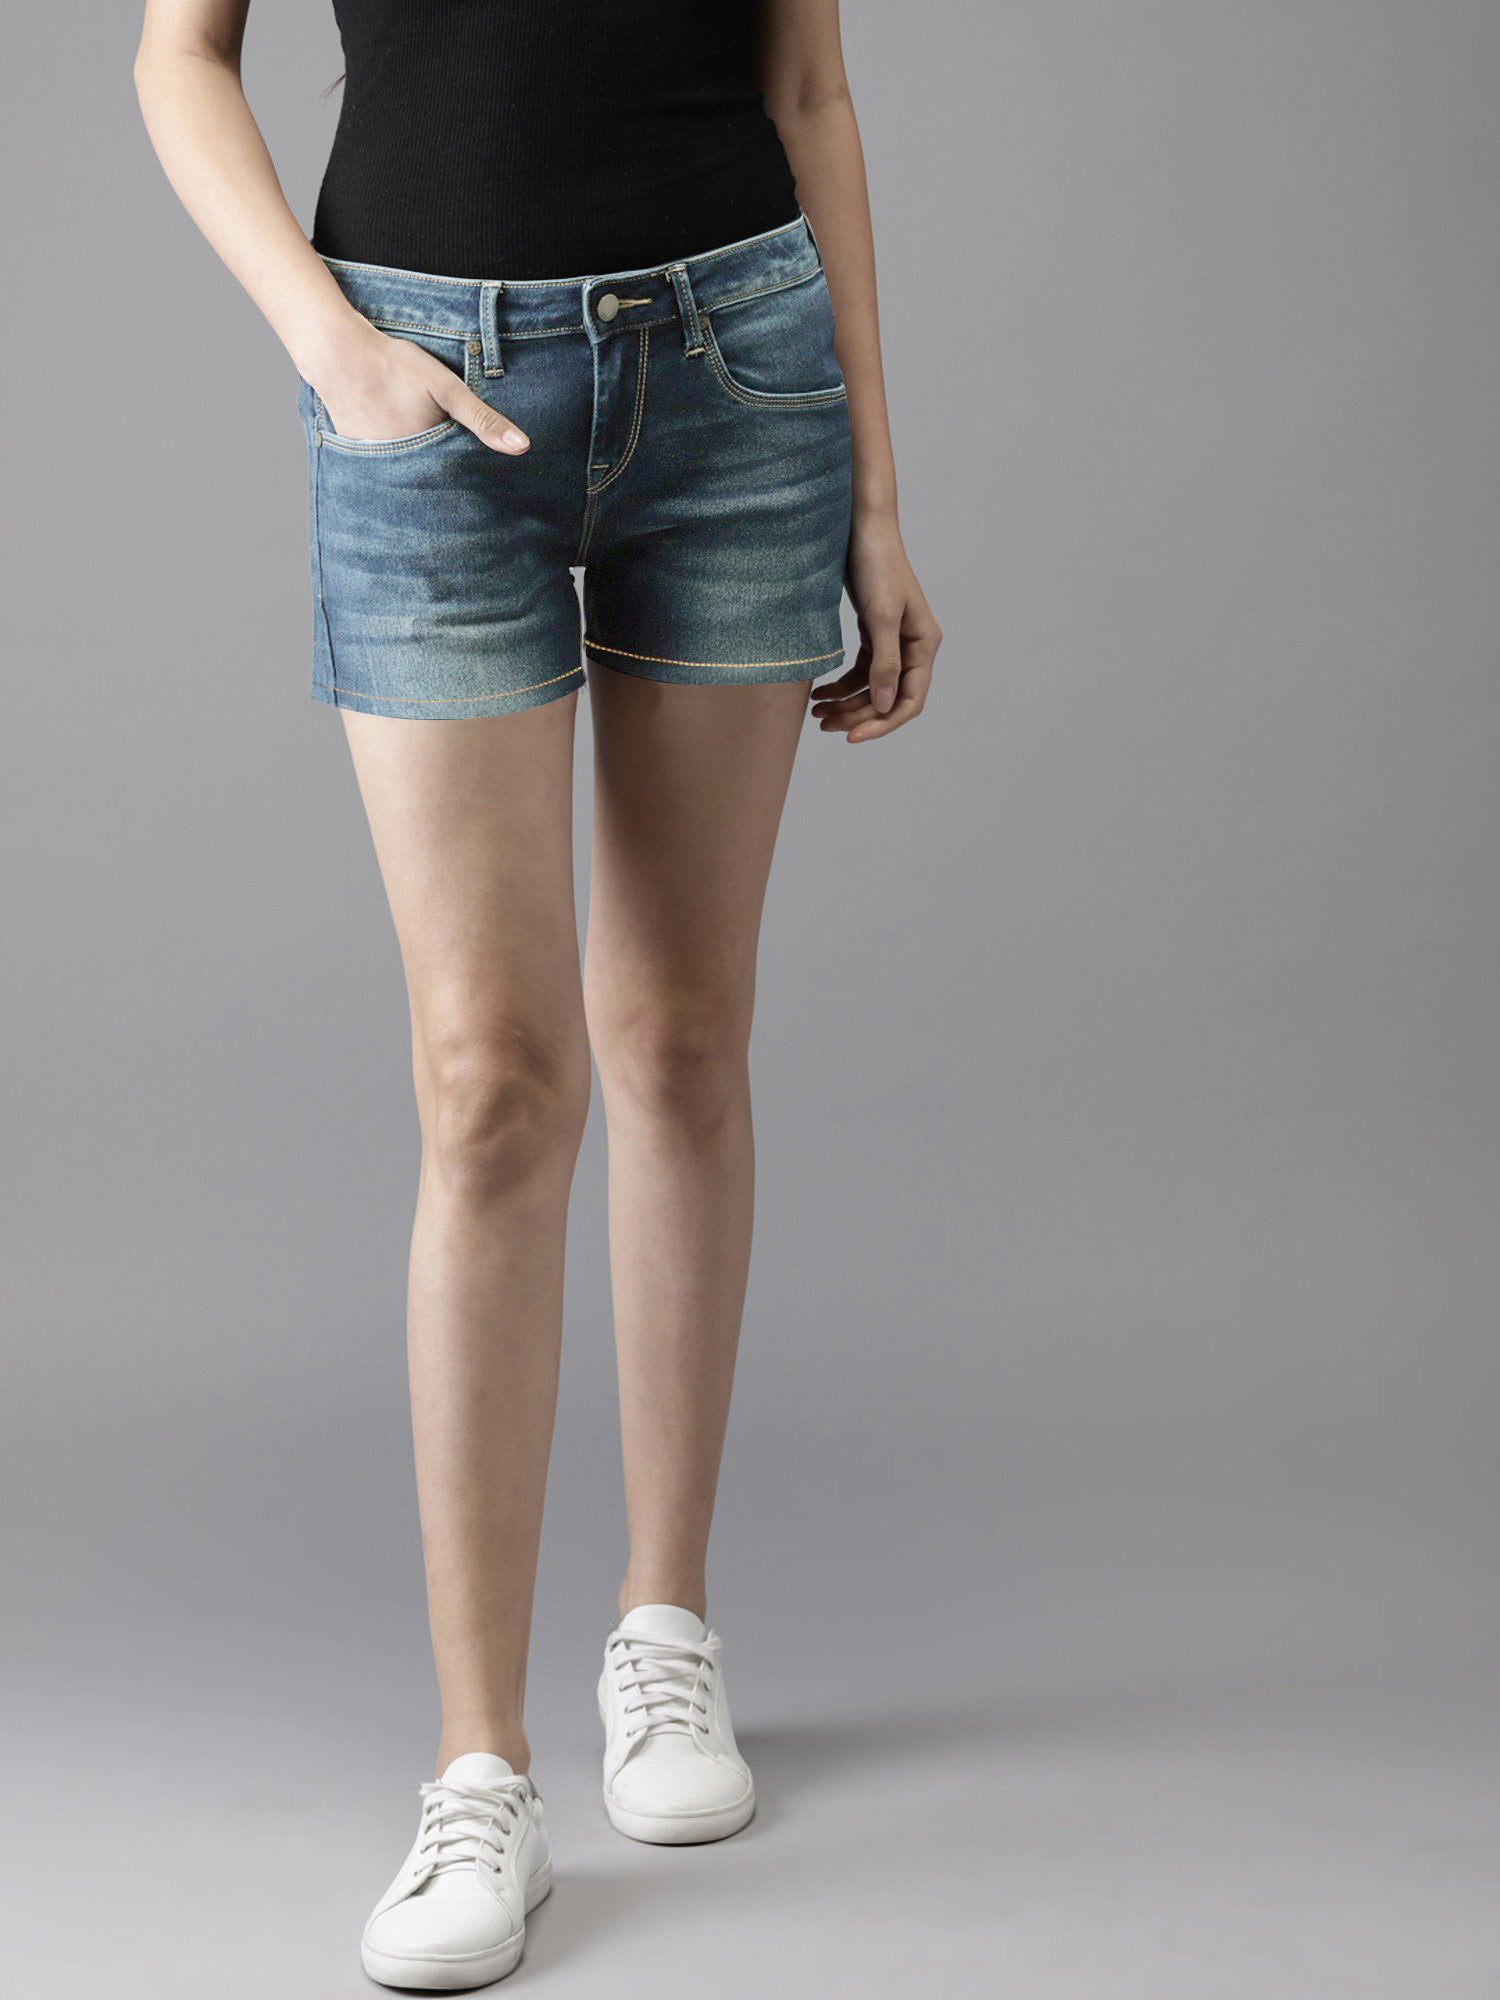 NXT Denim Short For Ladies-Blue Faded-SP2400